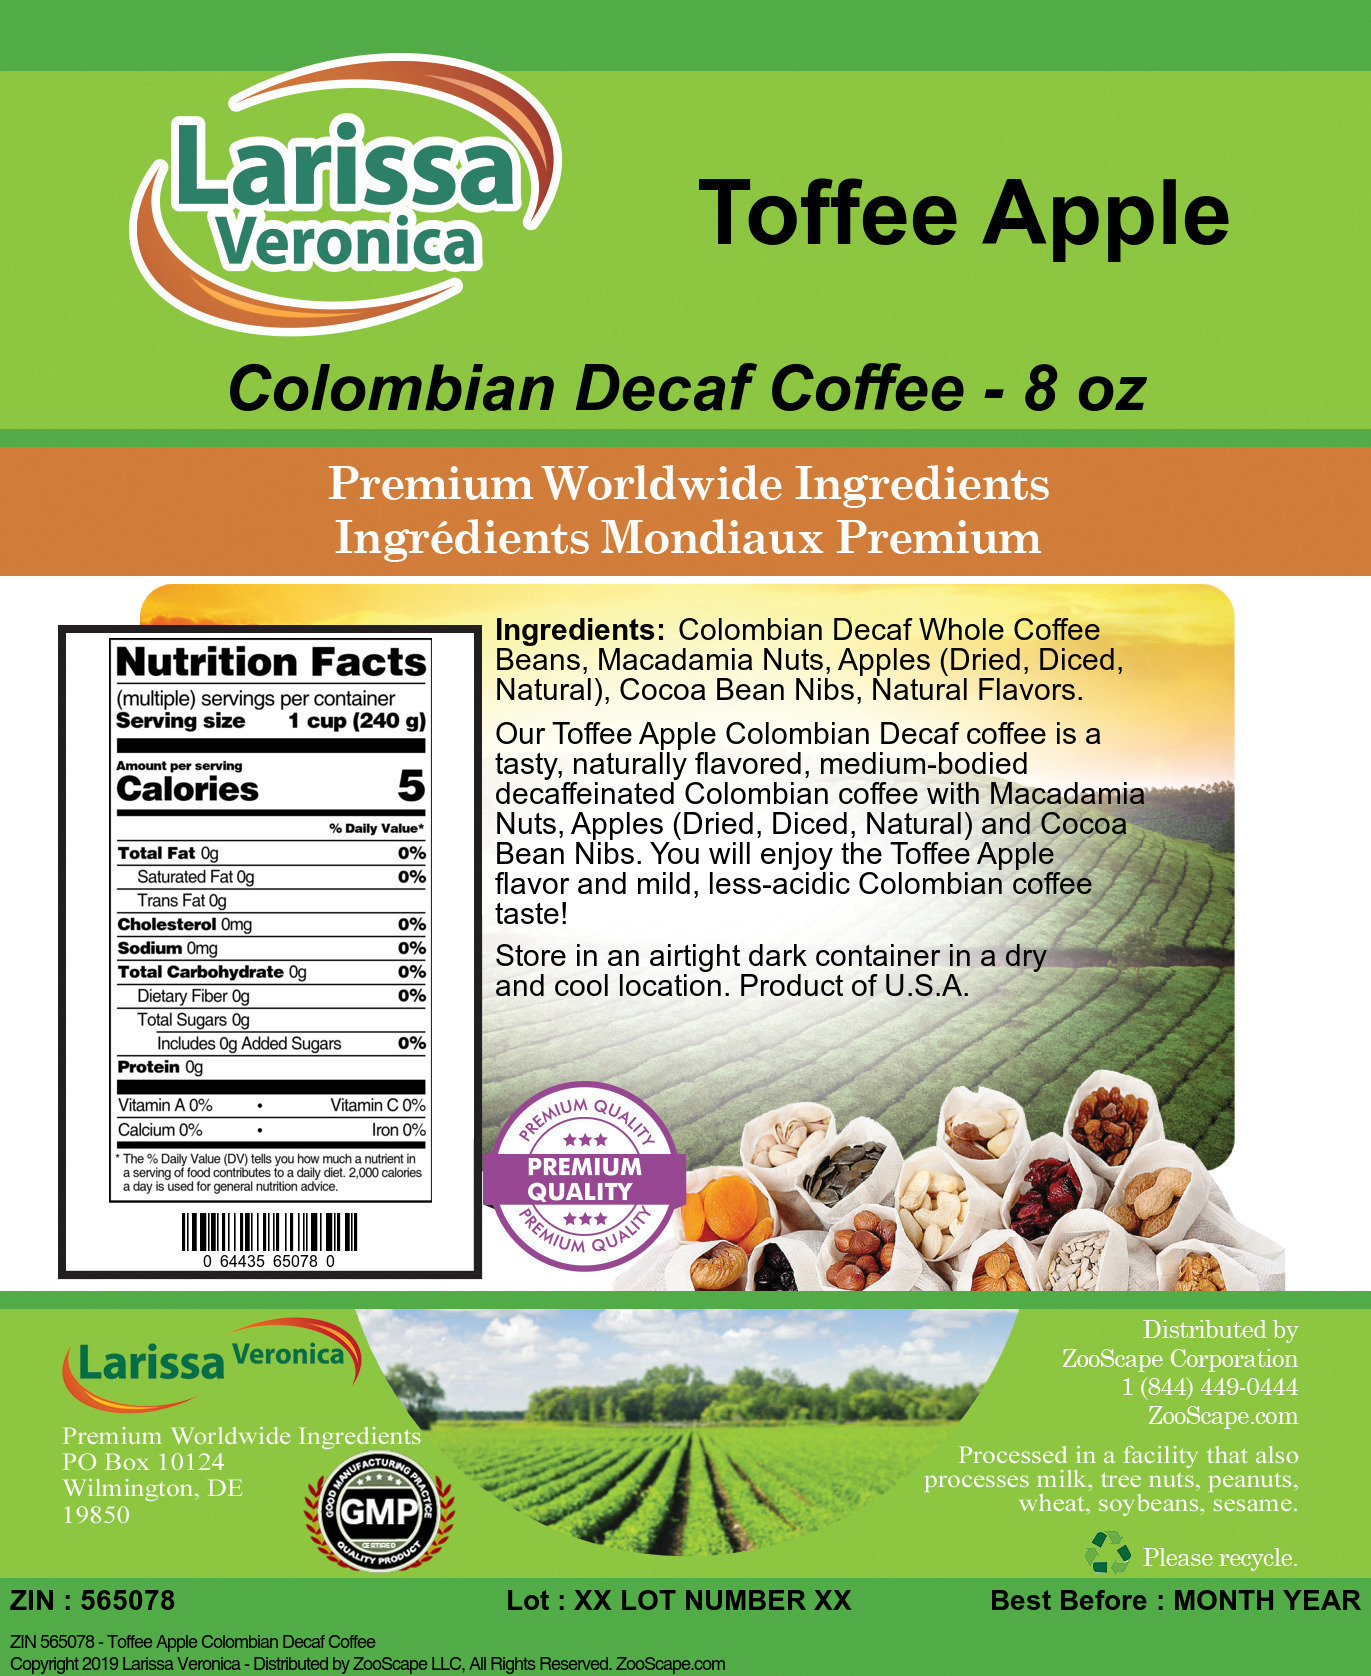 Toffee Apple Colombian Decaf Coffee - Label